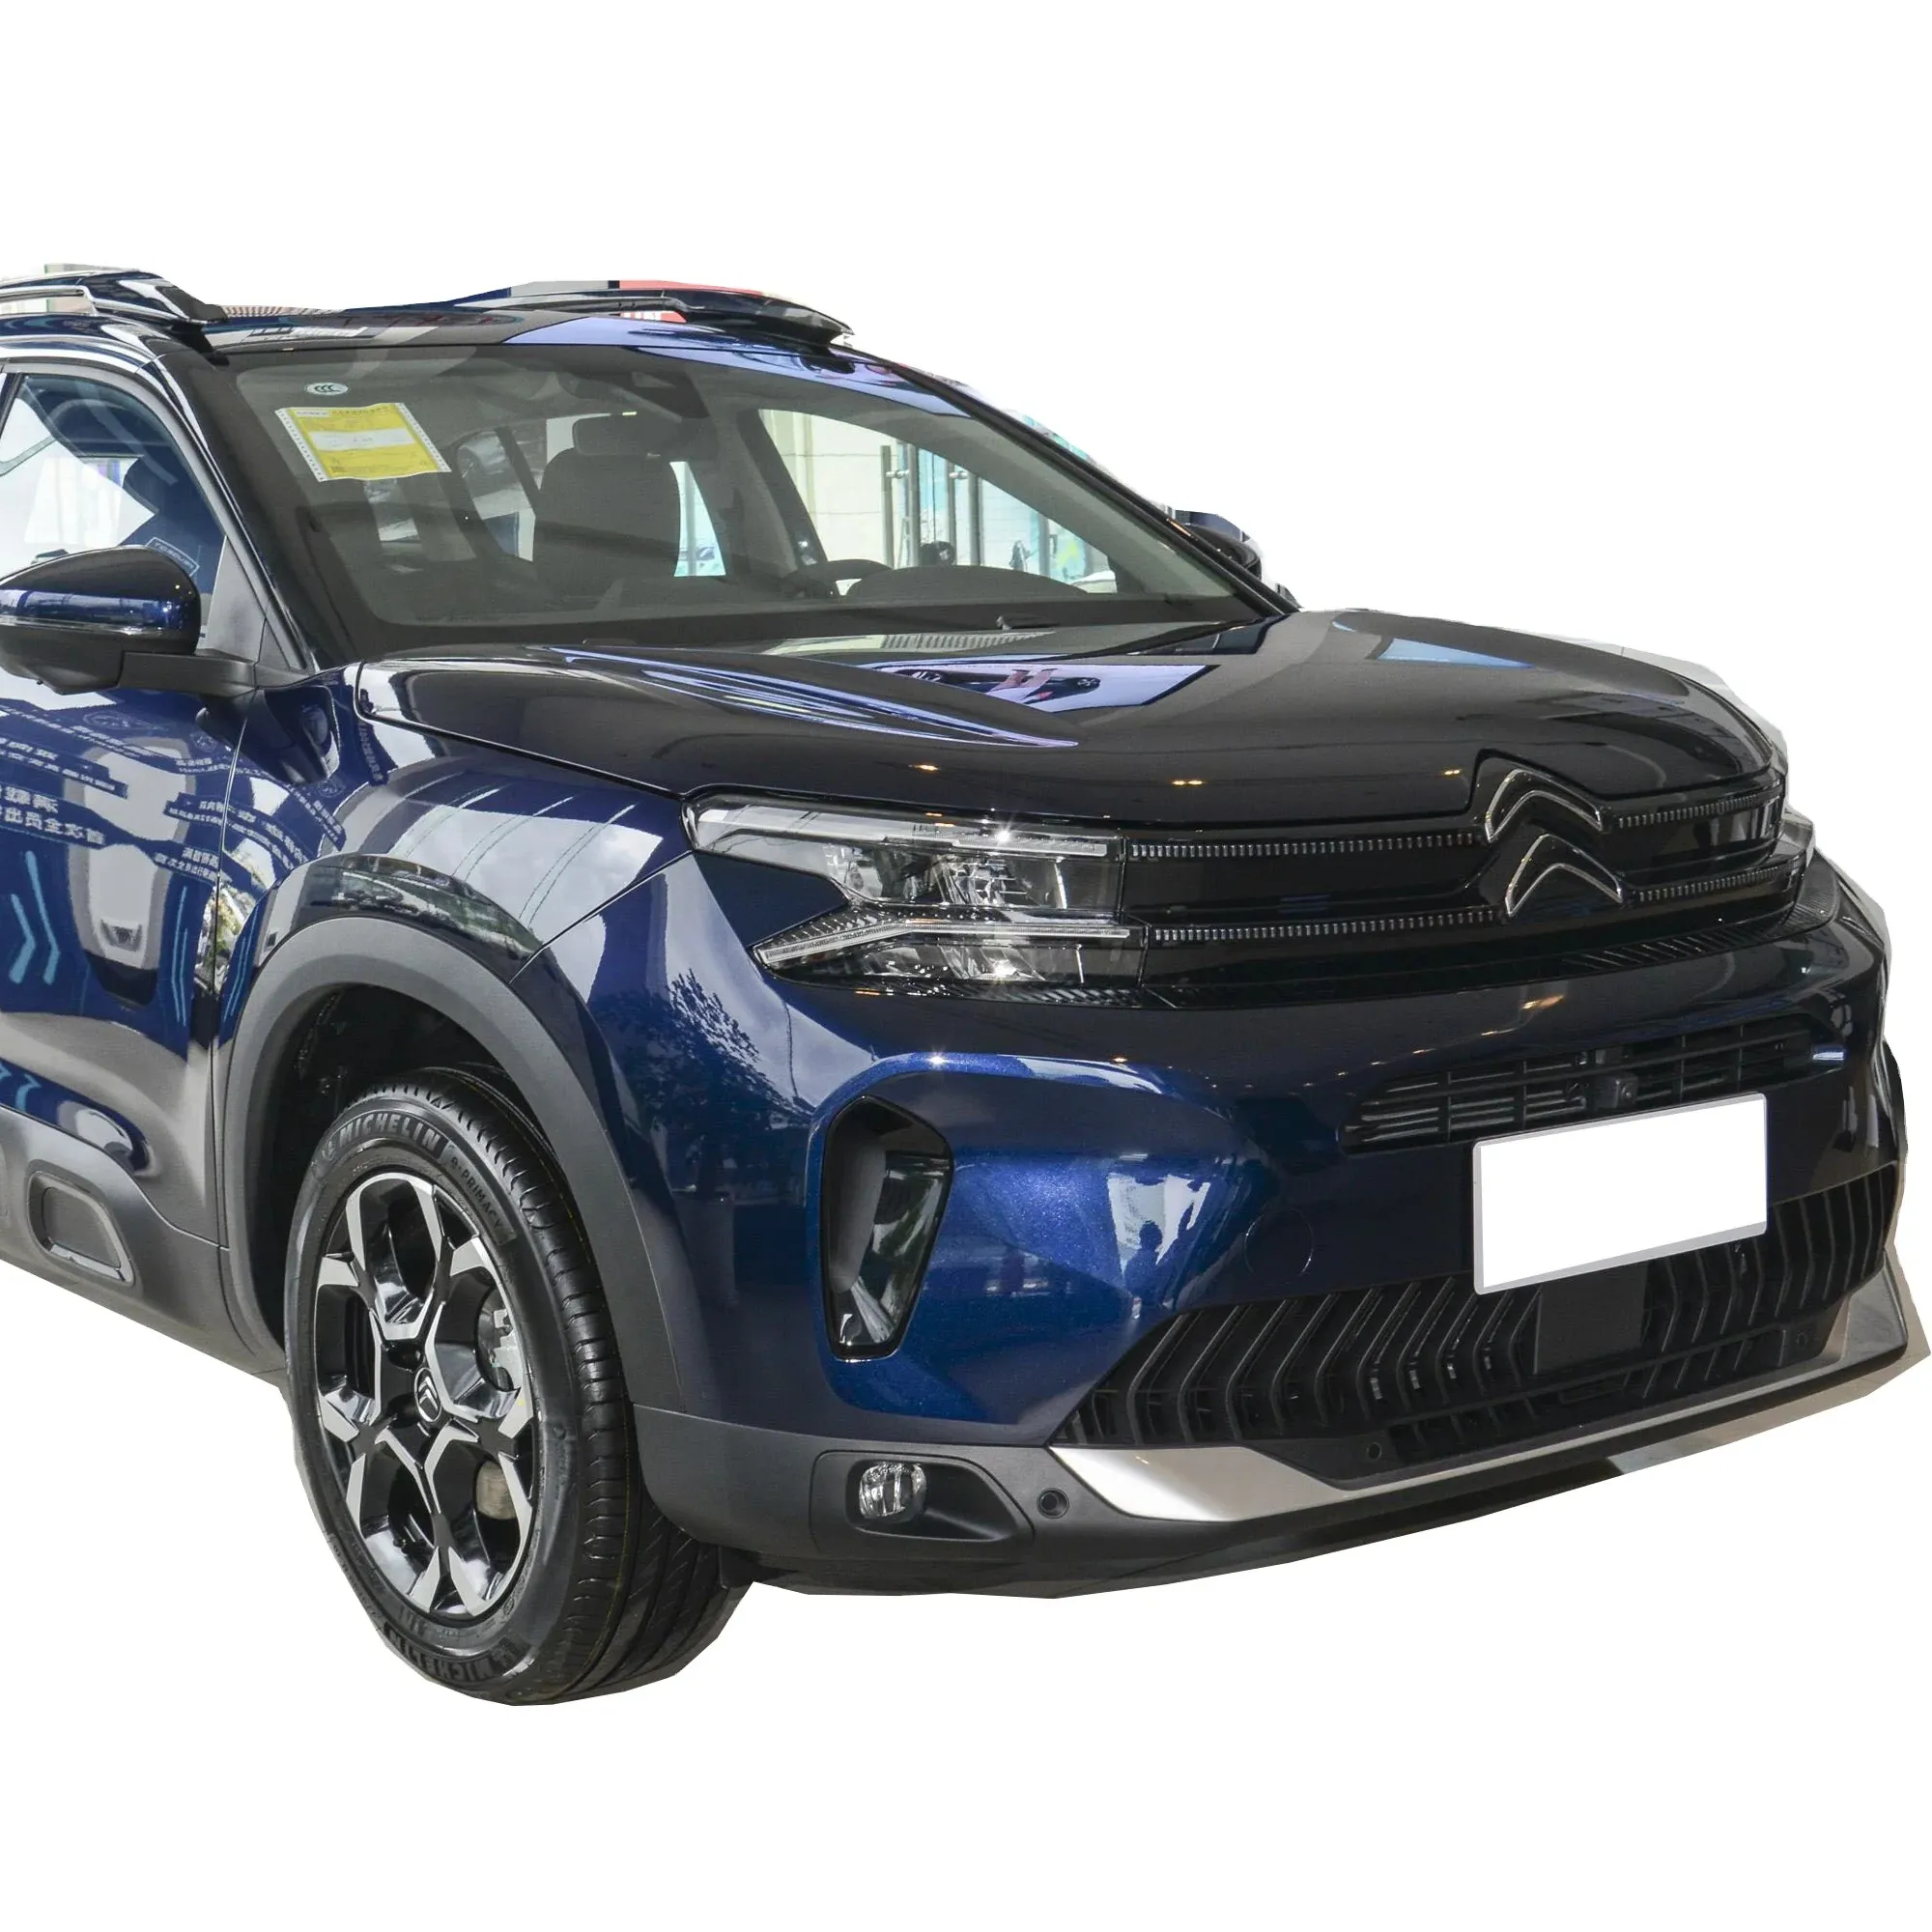 DF AUTO MADE IN CHINA 4 BY 2 SUV CITROEN C5 AIRCROSS